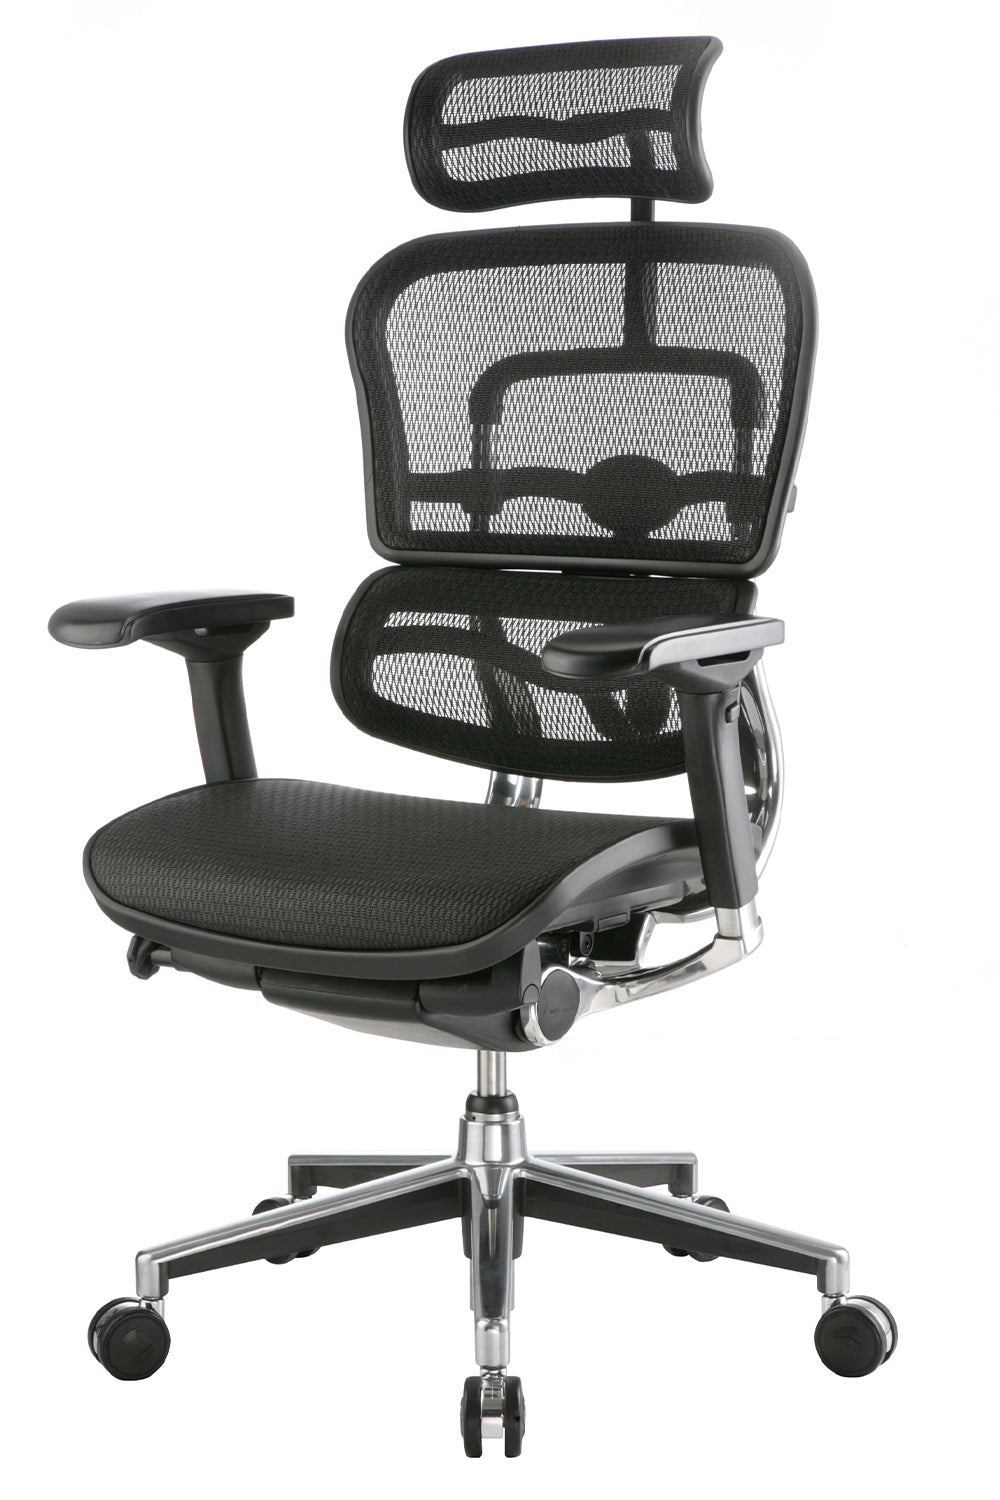 Maxwell Premium Executive Office High Back chair Mesh Seat with 5D Armrest and Aluminum Base - Black